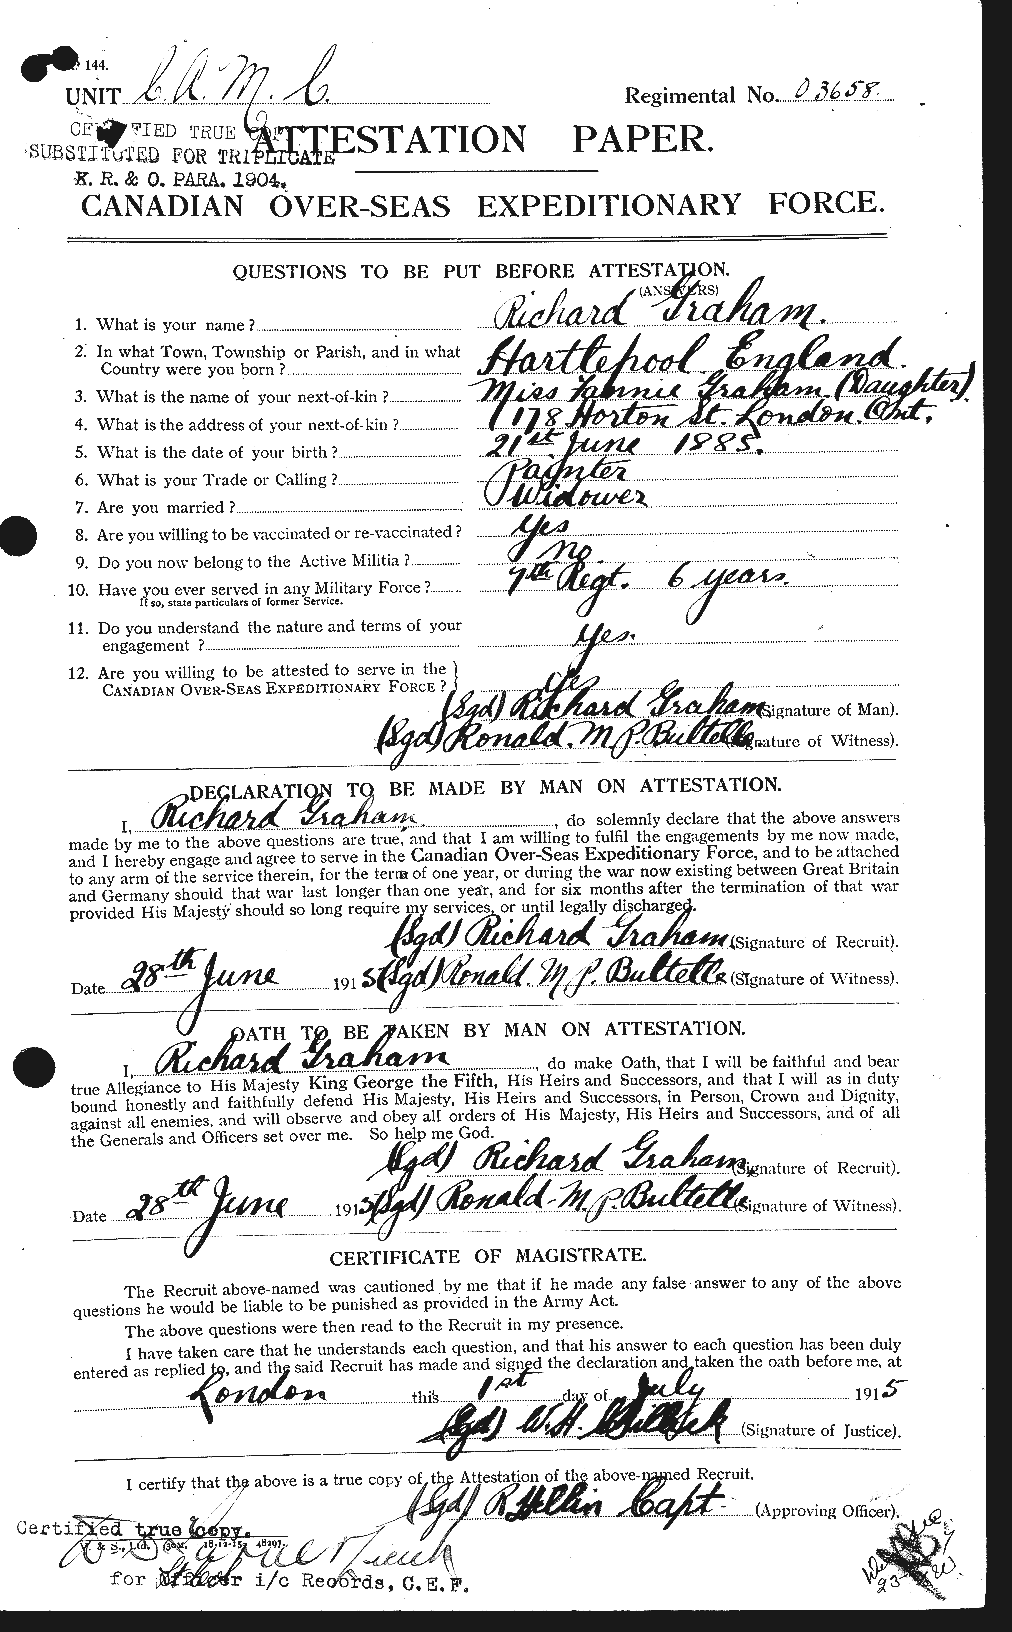 Personnel Records of the First World War - CEF 359367a